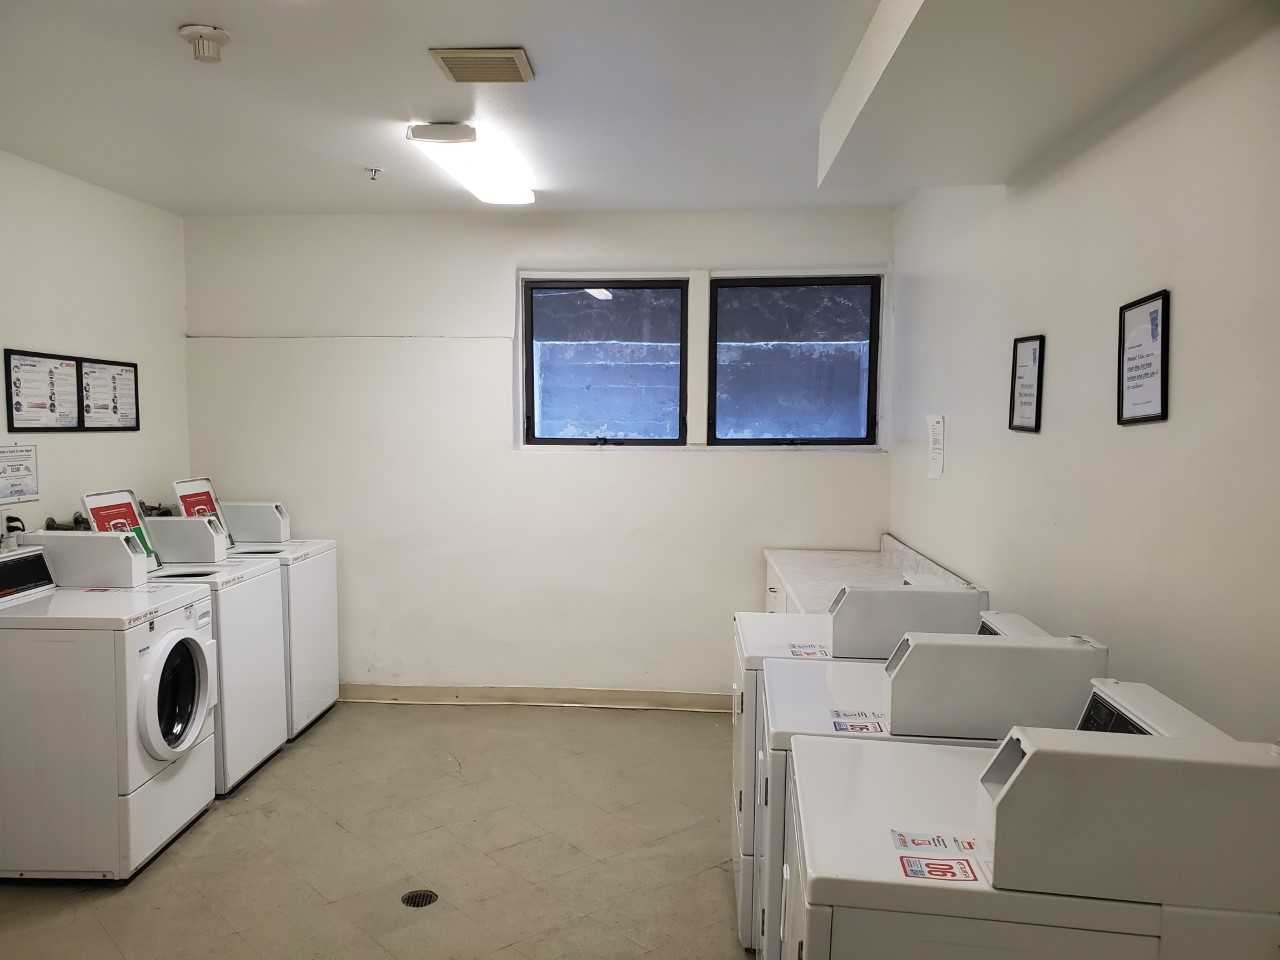 Laundry room with multiple washer and dryer machines across from each other. There are two small windows and some signs posted on the wall.